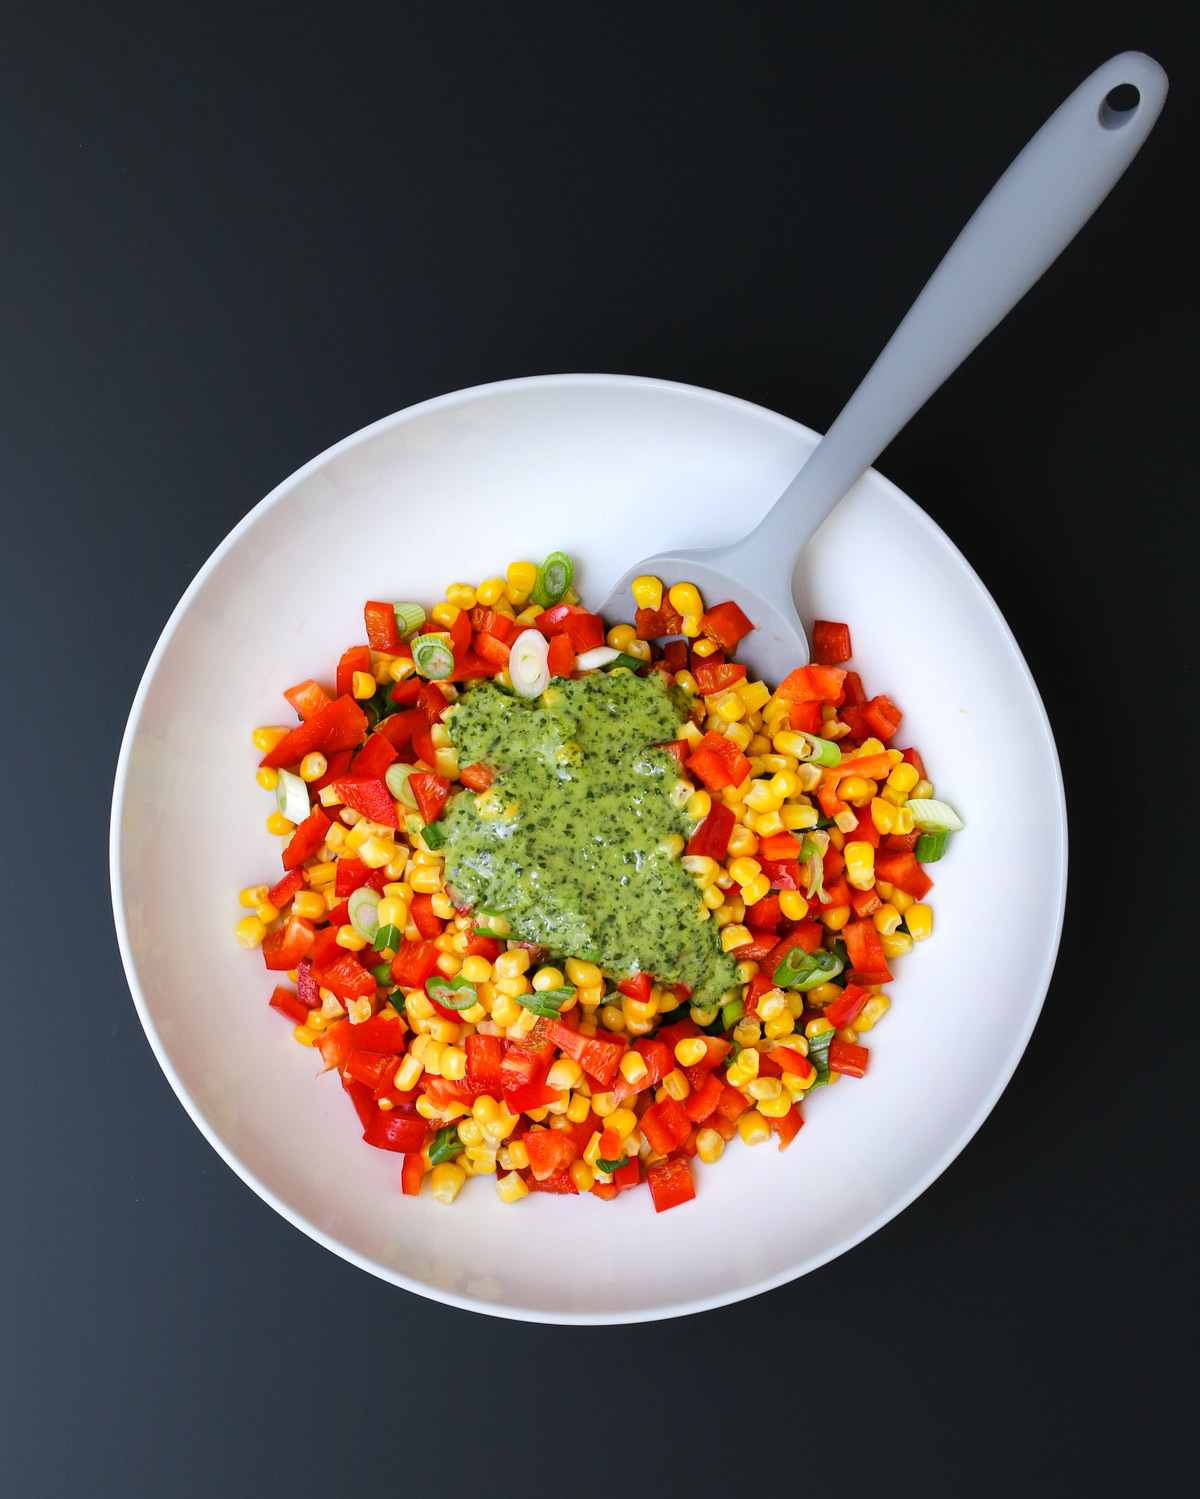 cilantro lime dressing in a puddle atop the vegetables with the gray spatula.